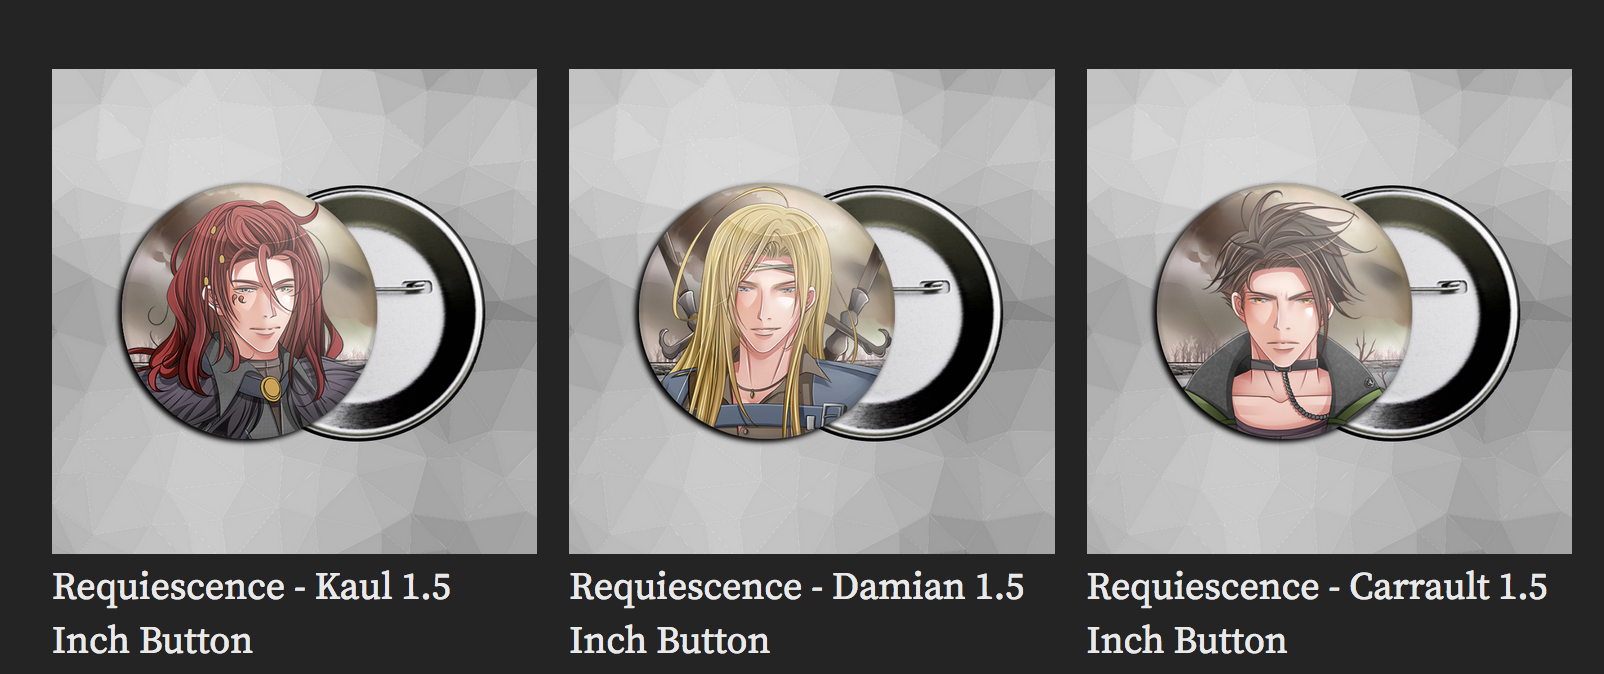 horizontal line of req buttons of kaul, carrault, and damian from the ag shop website